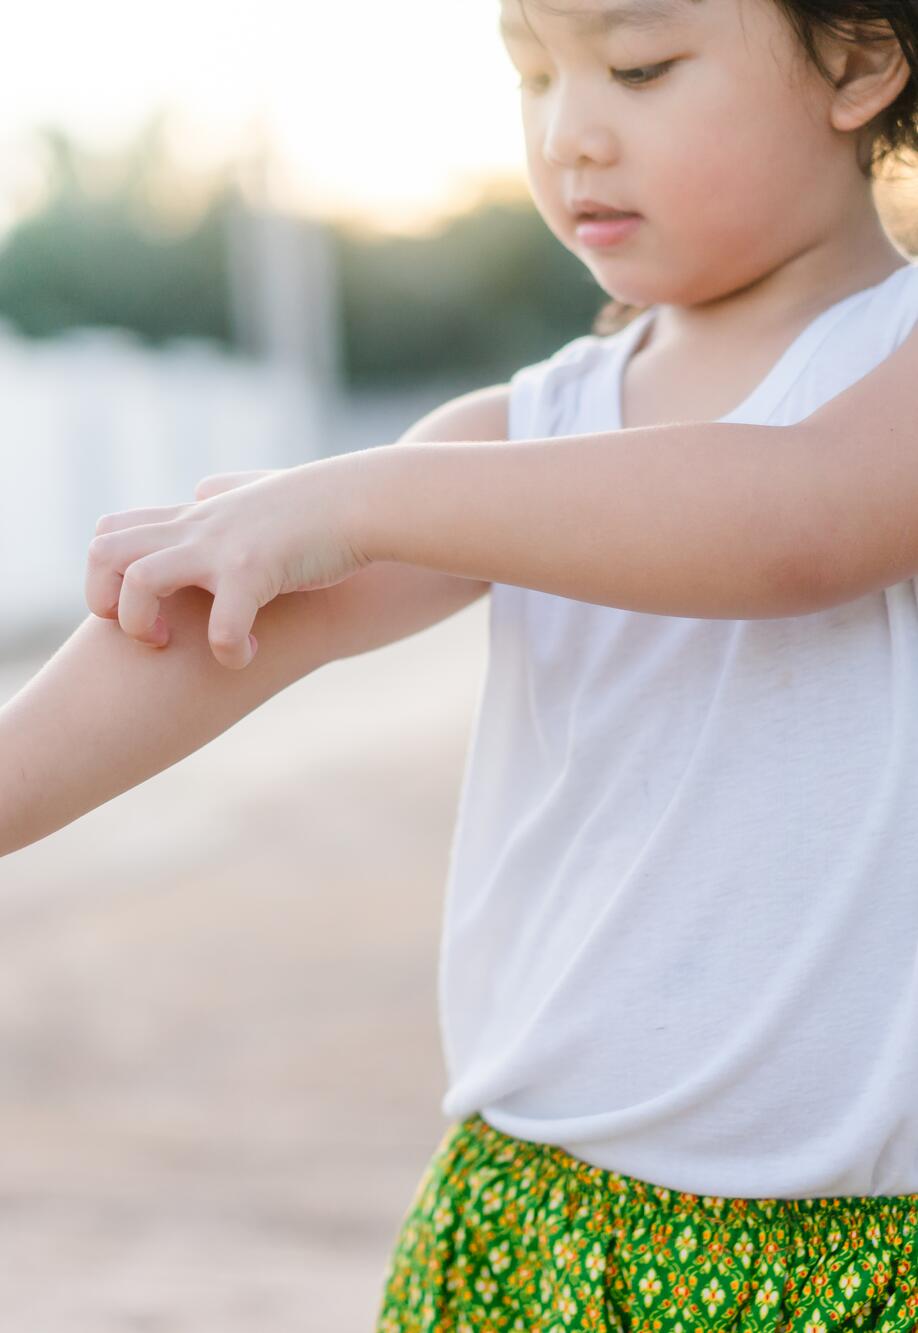 AD_ATOPIE_LITTLE-GIRL-SCRATCHING-ARM_LARGE_2021 472x472